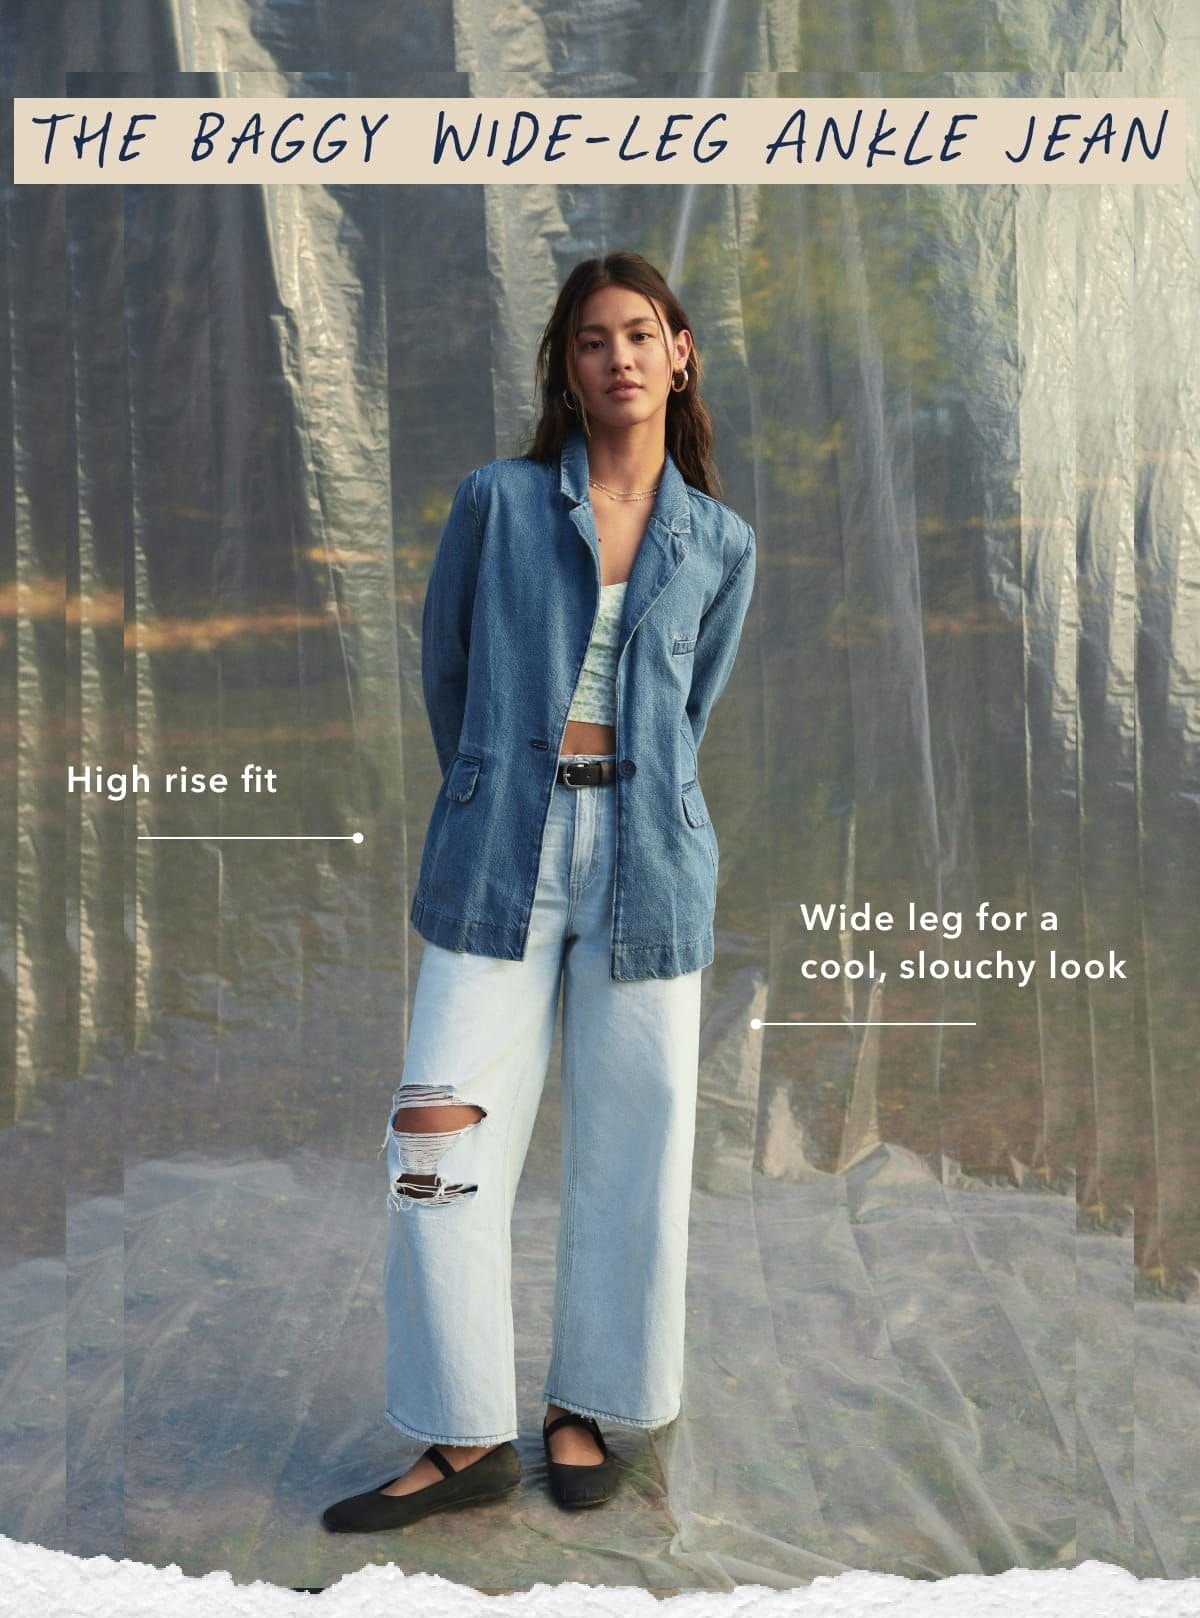 The Baggy Wide-Leg Ankle Jean | High rise fit | Wide leg for a cool, slouchy look